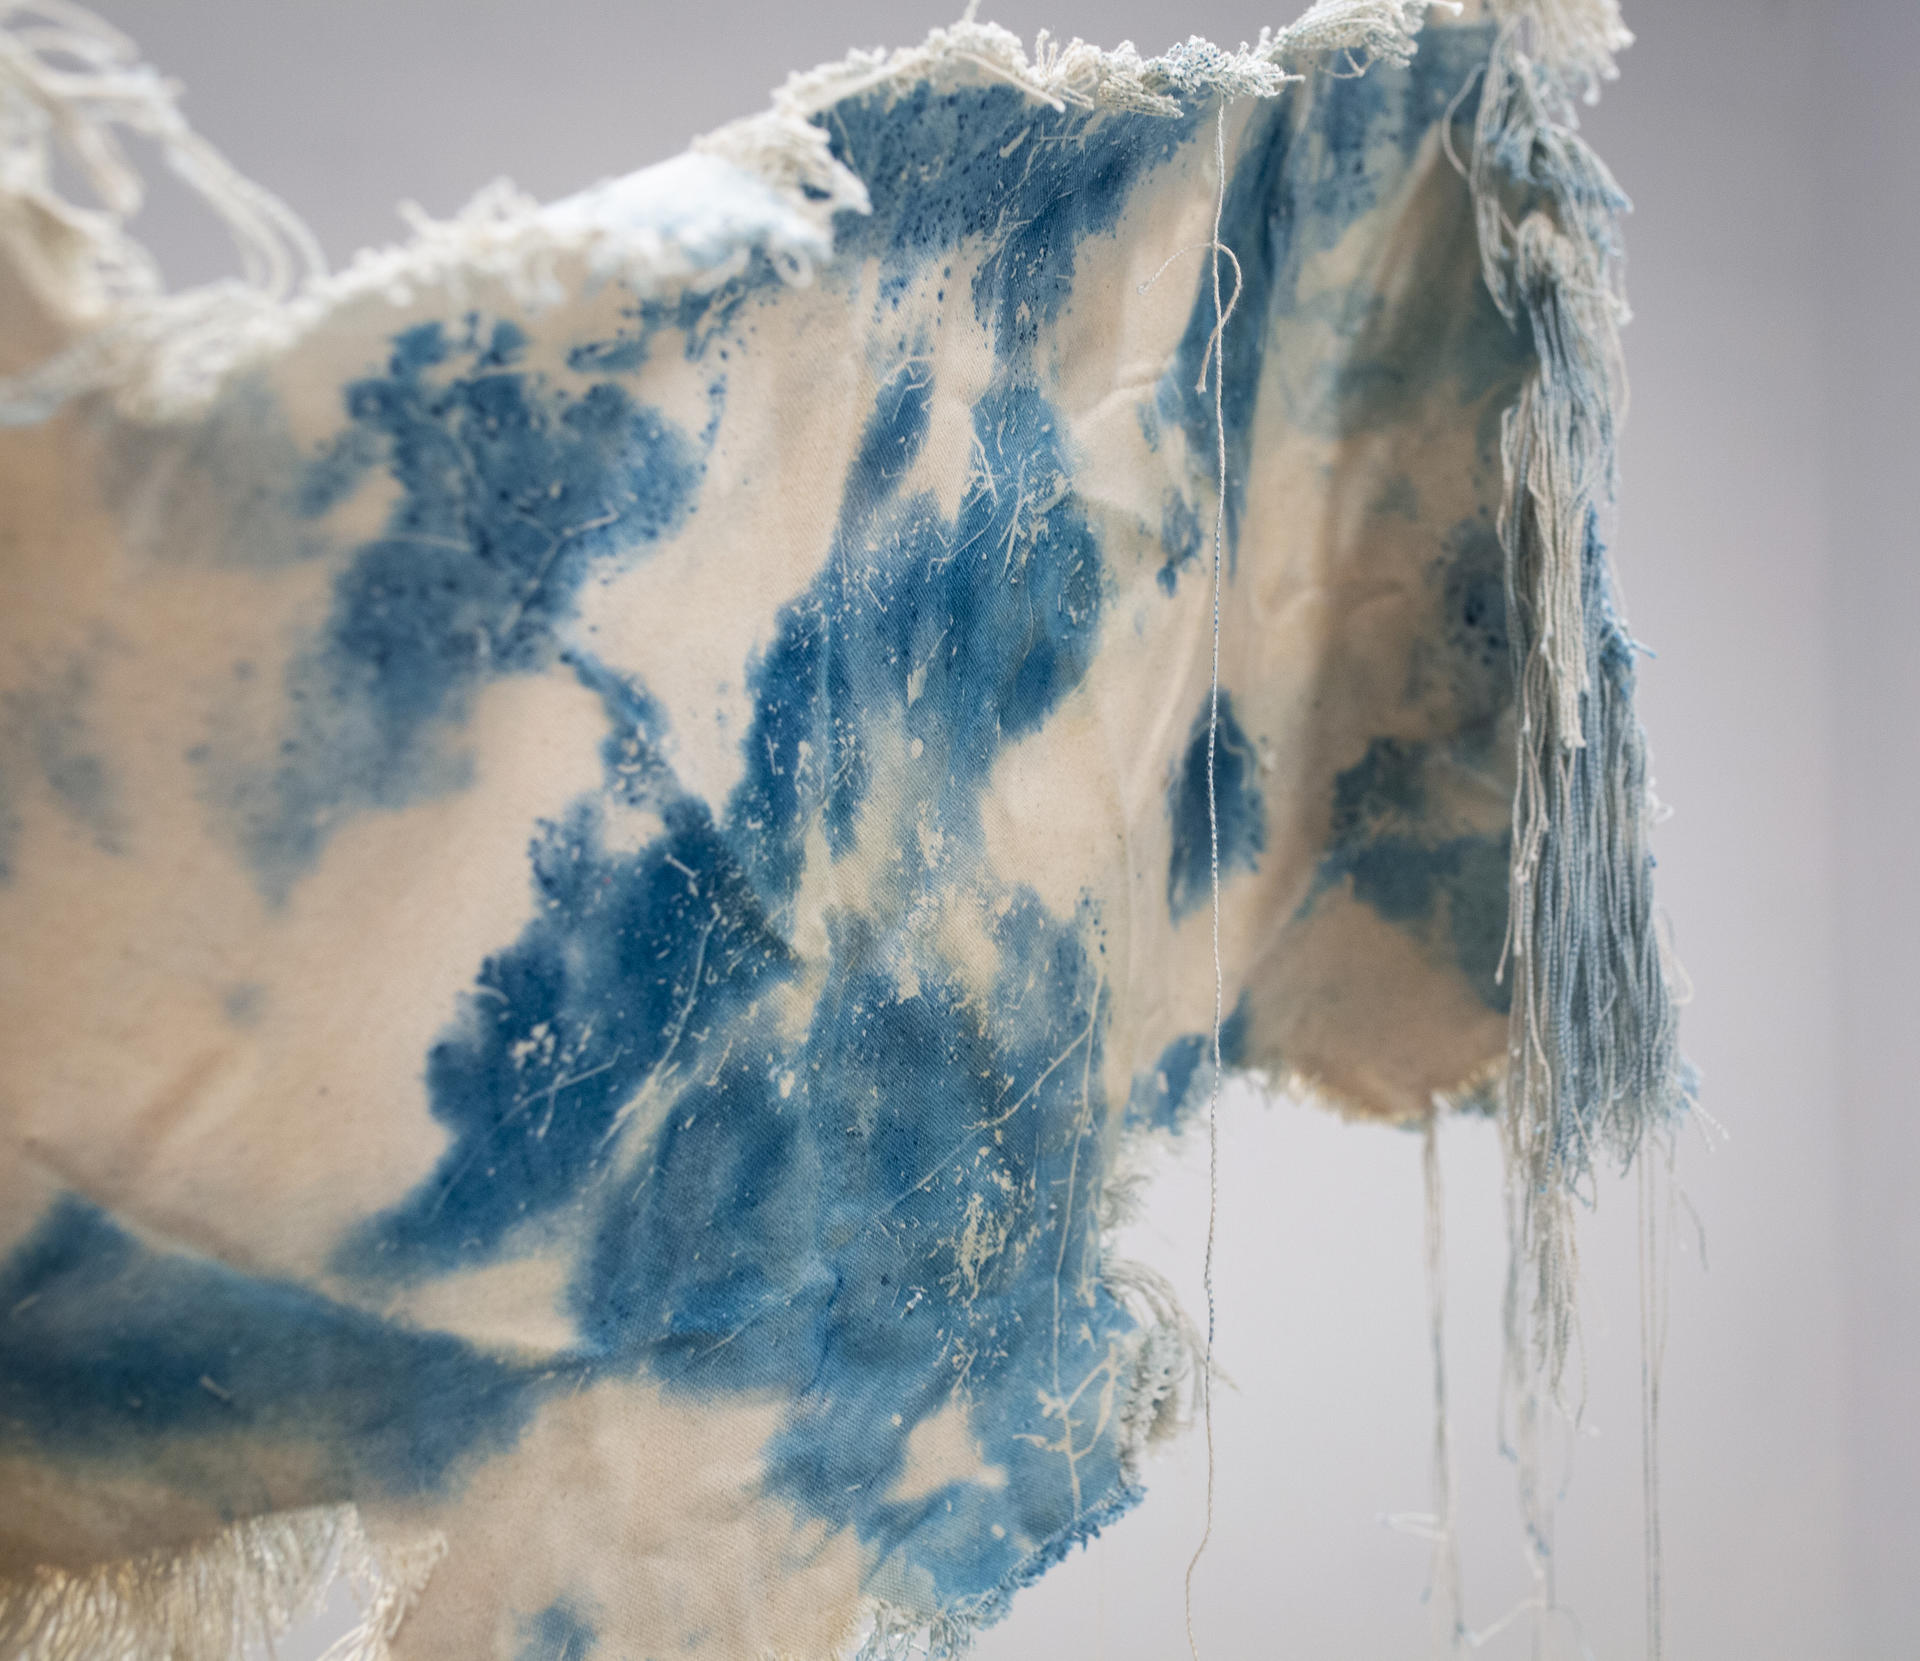 A beige canvas, dyed with spots of cyanotype is twisted and suspended in the air. The edges of the canvas have been unraveled and hang downward. 